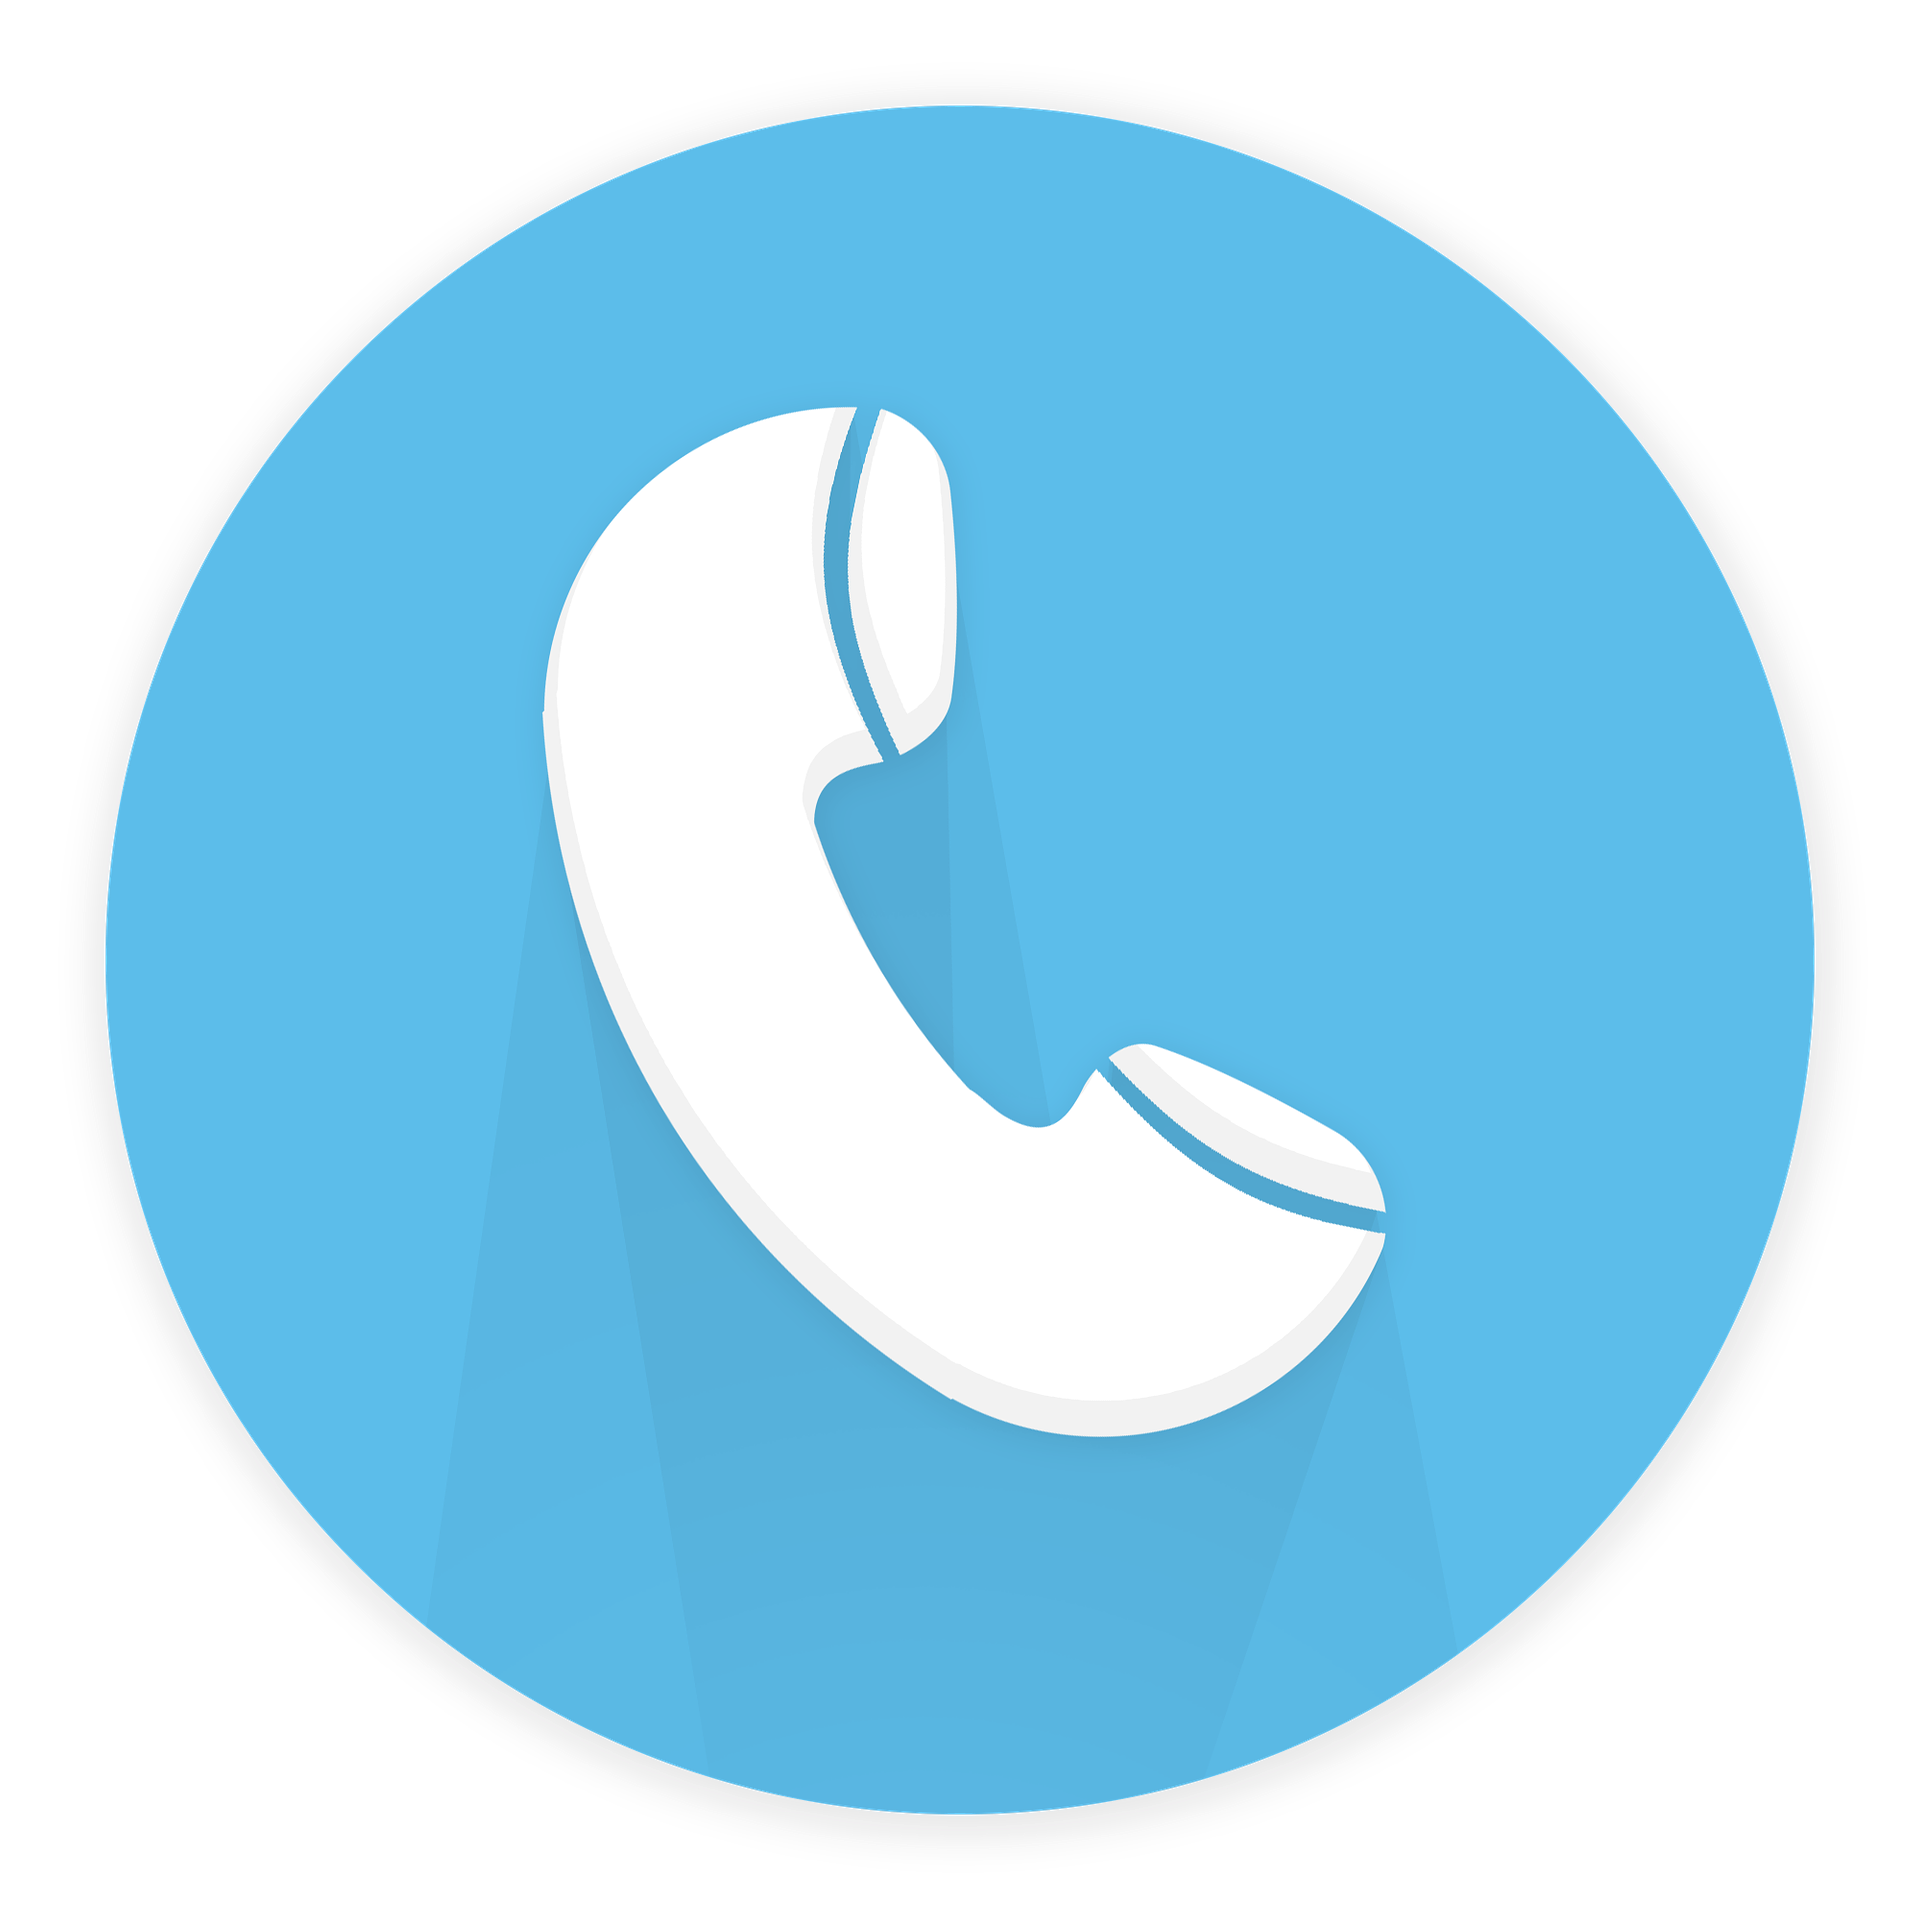 A white telephone symbol in a blue circle; complete your details and submit to our team for a call back within one working hour.